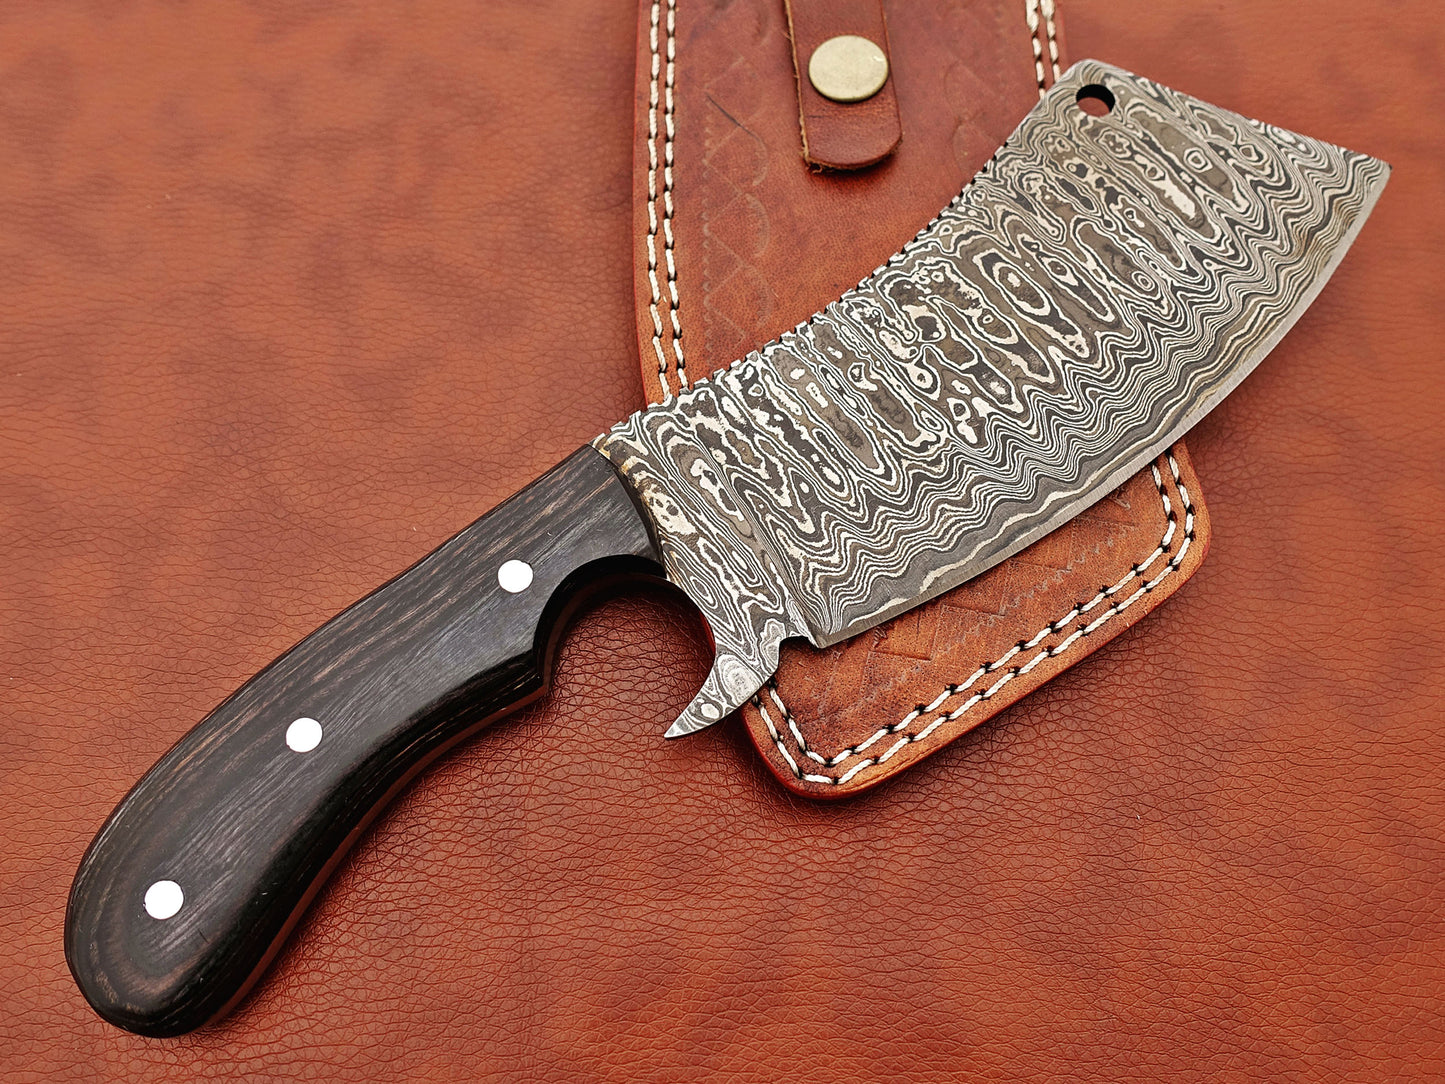 12" hand forged Damascus steel meat Cleaver, Walnut wood scale chopper knife, Leather sheath included